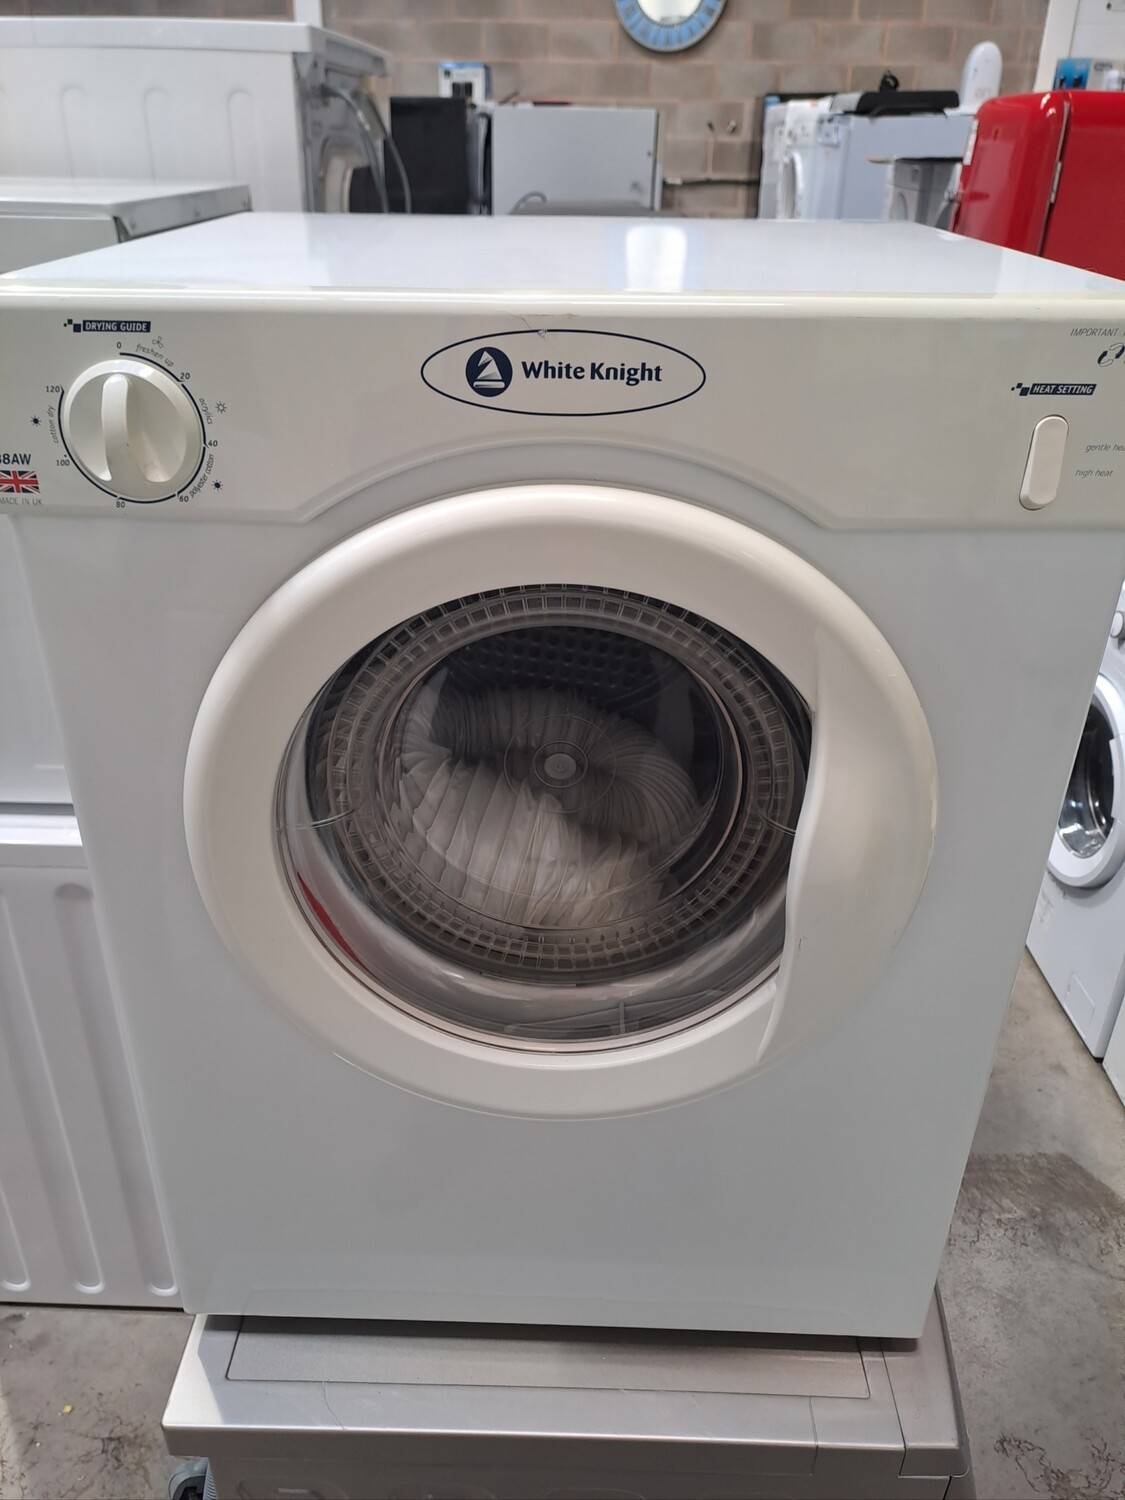 White Knight 38AW 3KG Compact Tumble Dryer White Refurbished H67cm
W49cm
D48cm 3 Months Guarantee. This item is located in our Whitby Road Shop 